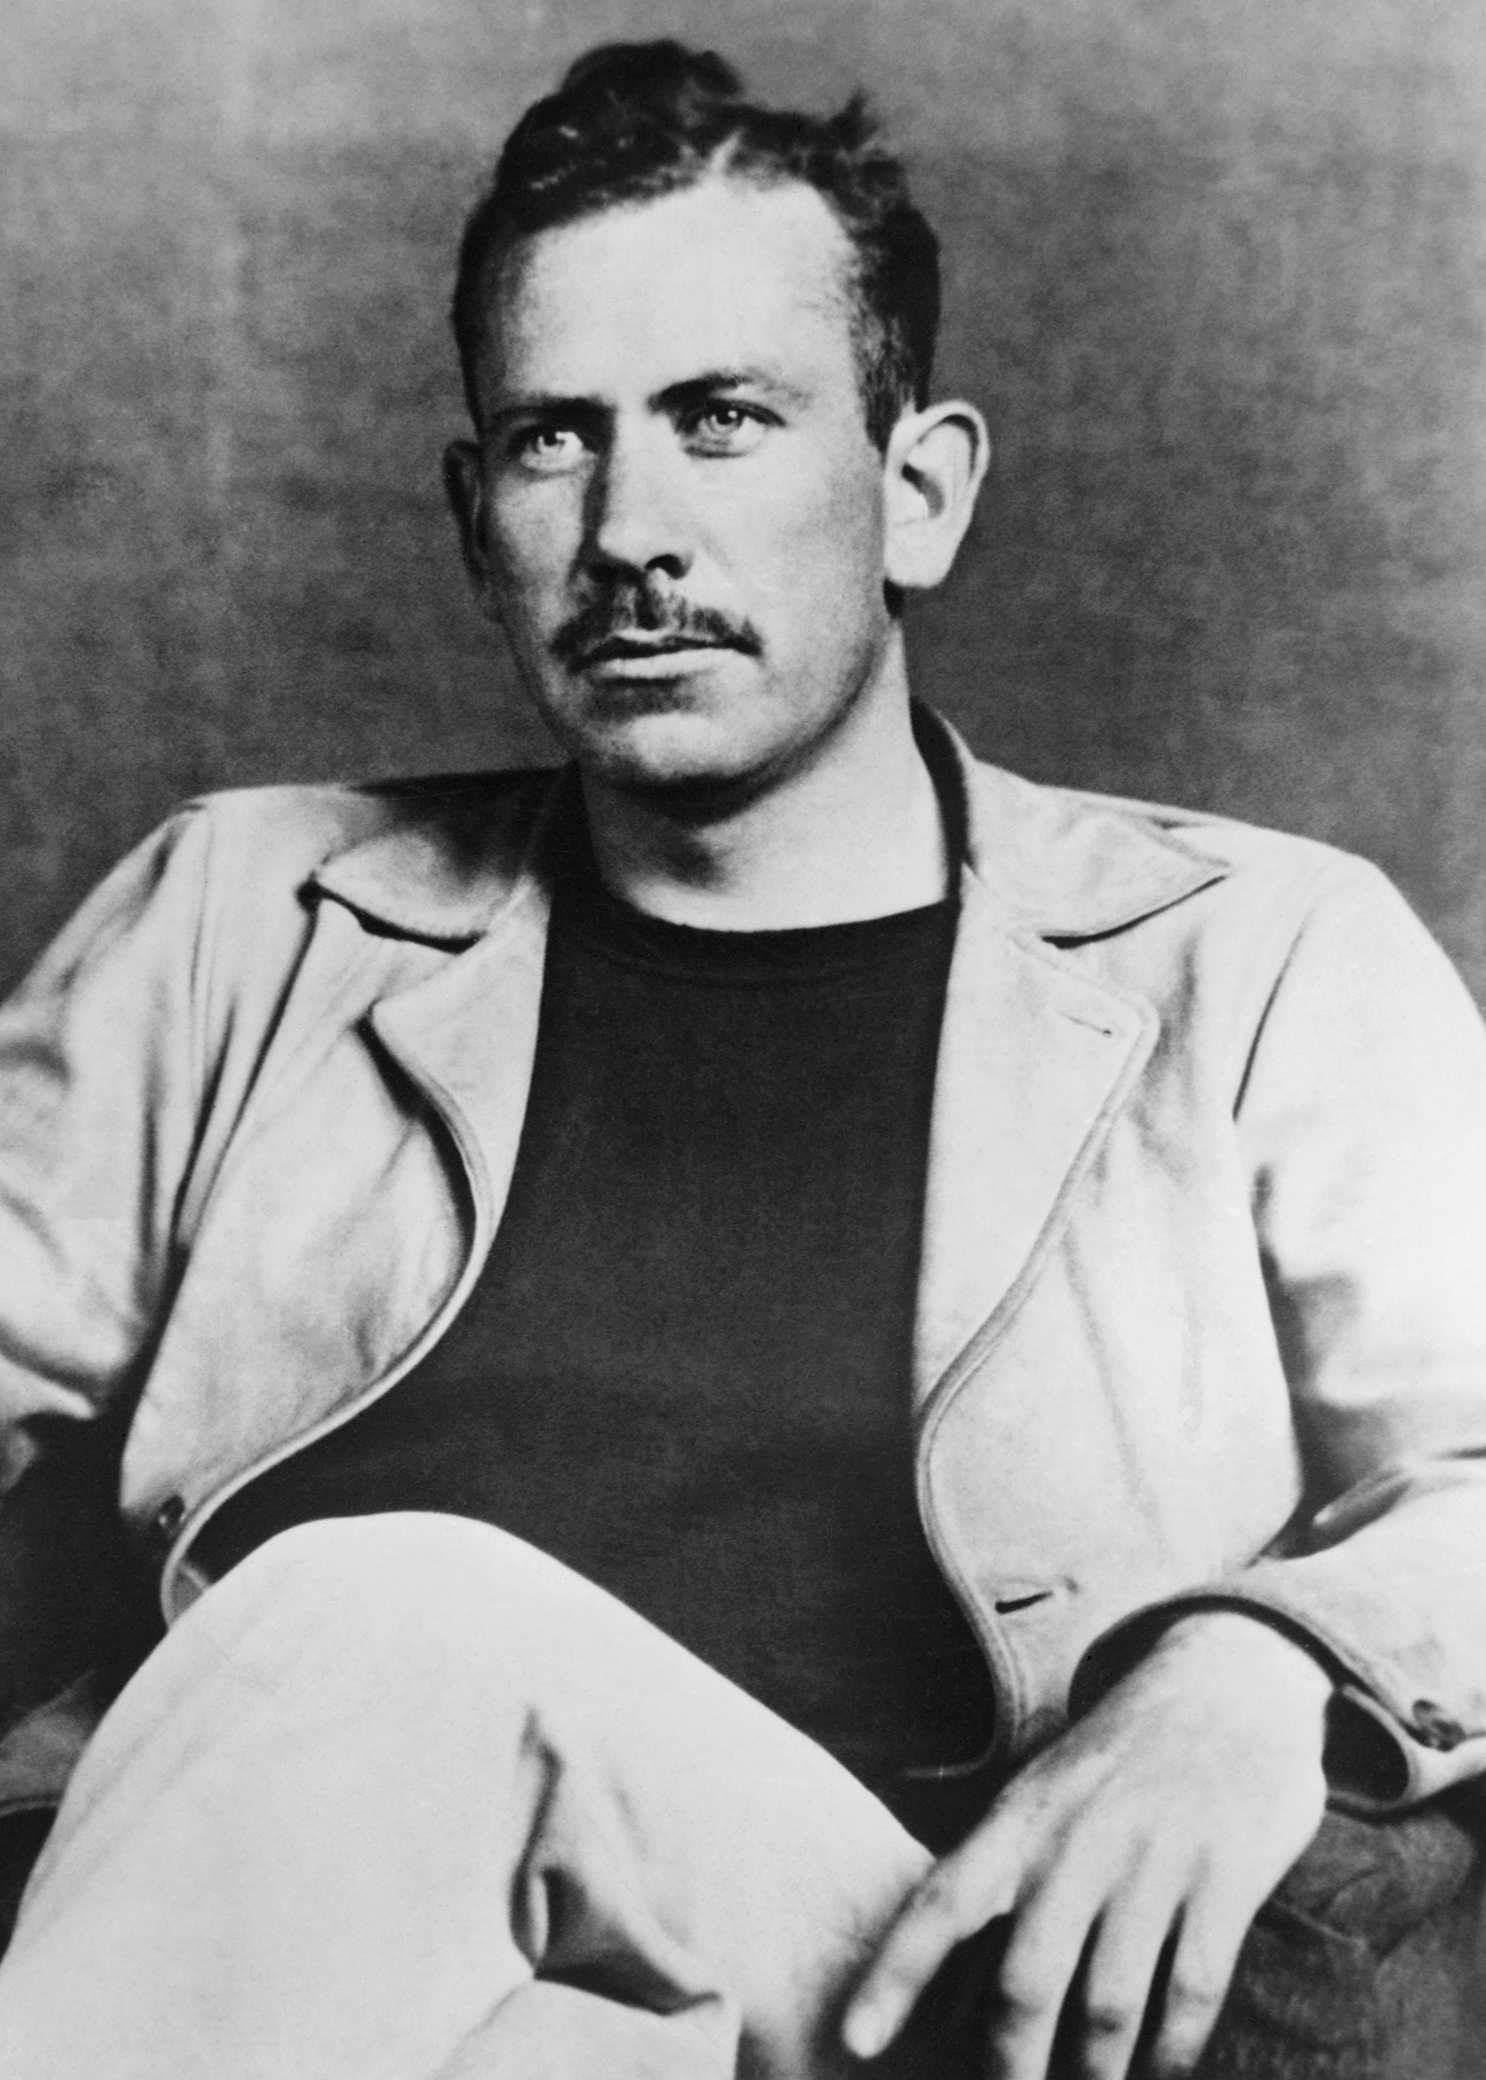 John Steinbeck (1902-1968) the American author as a young man. His novels include The Grapes of Wrath, Of Mice and Men and East of Eden. He won the Nobel prize for literature in 1962. (Photo by © Hulton-Deutsch Collection/CORBIS/Corbis via Getty Images)